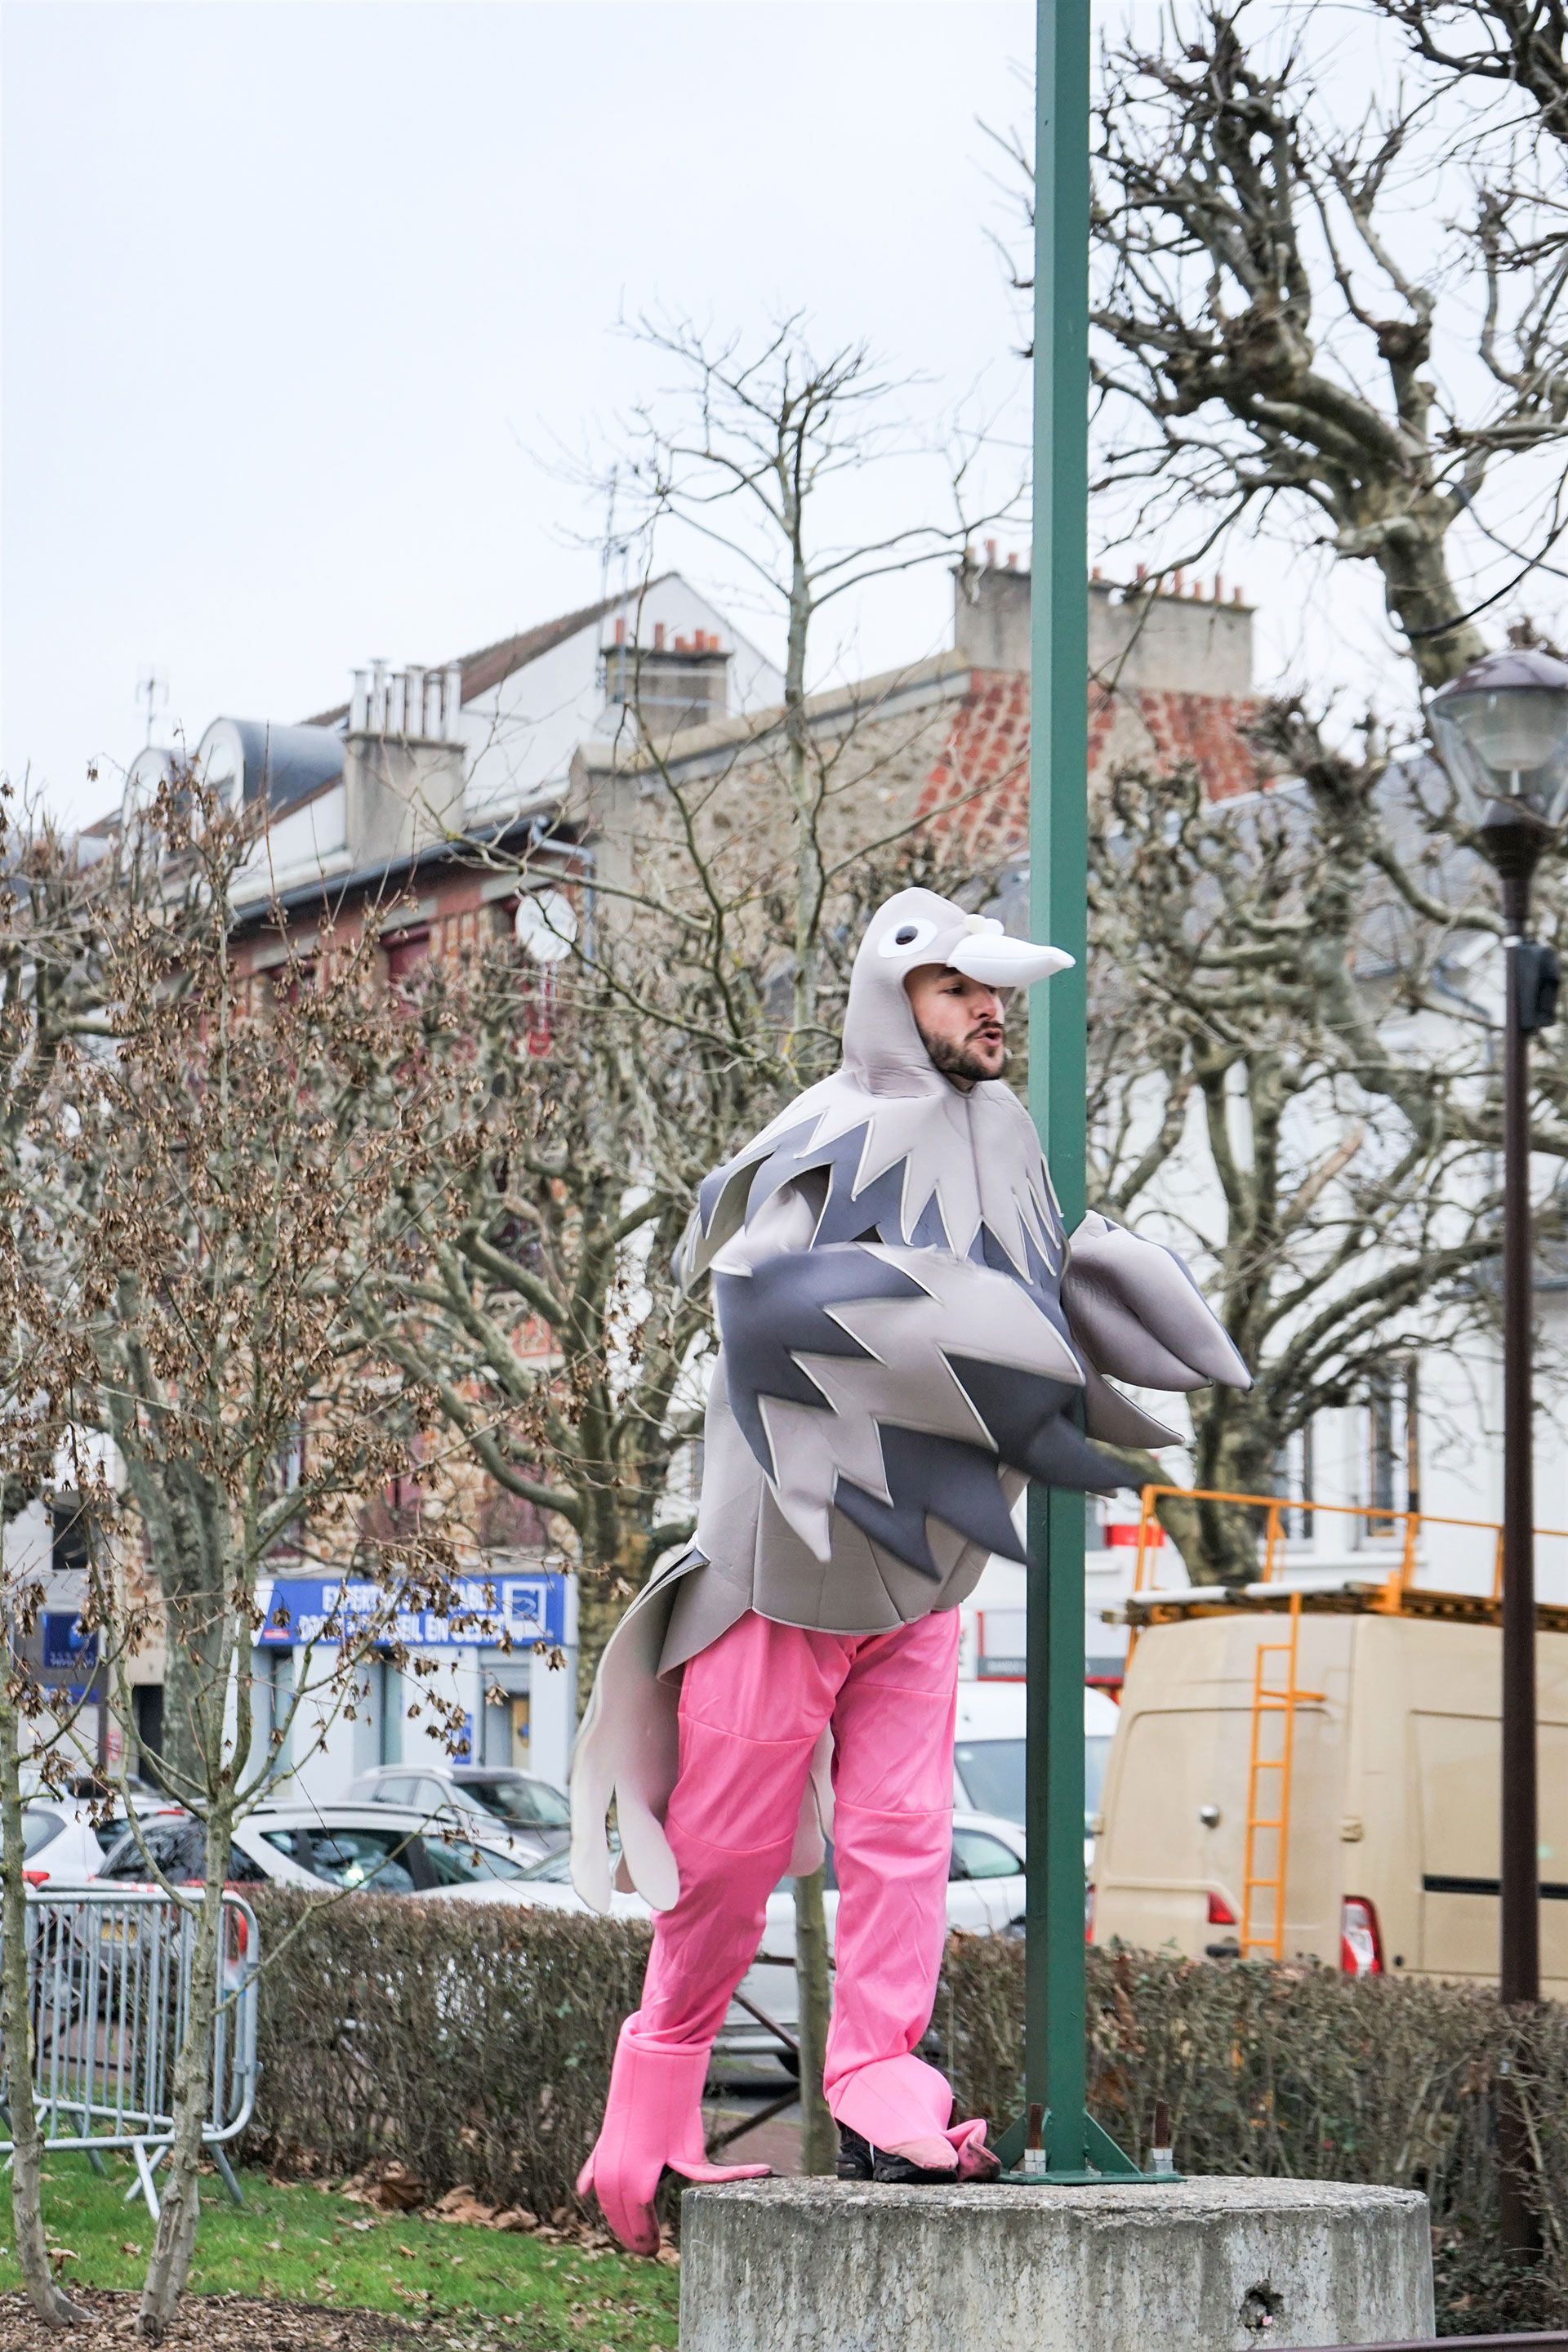 Le Pigeon,, 2022, performance/video, CAC Brétigny/The Real Show, 18:20 min, photos by Elena Lespes Muñoz,Link to video